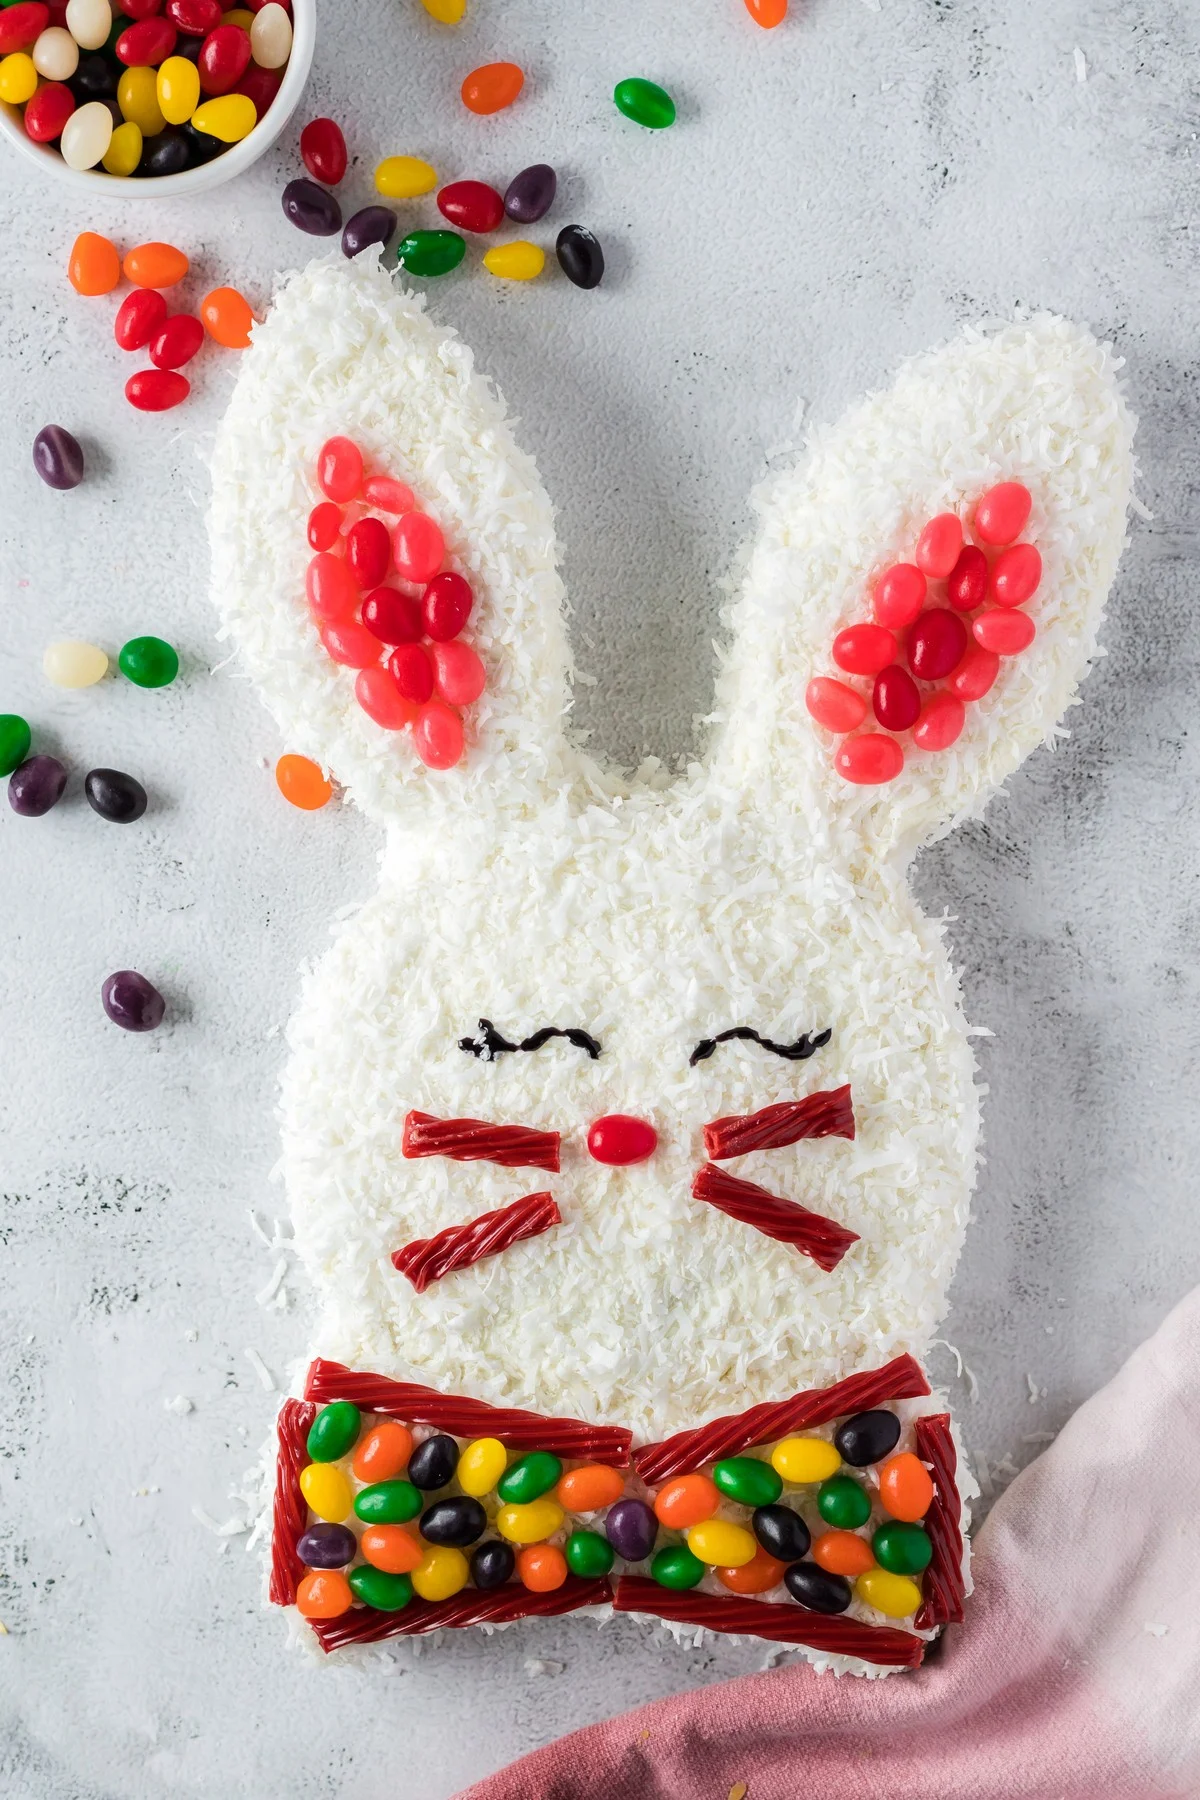 easter bunny cake with jelly beans as ears and bow tie, twizzlers as mouth